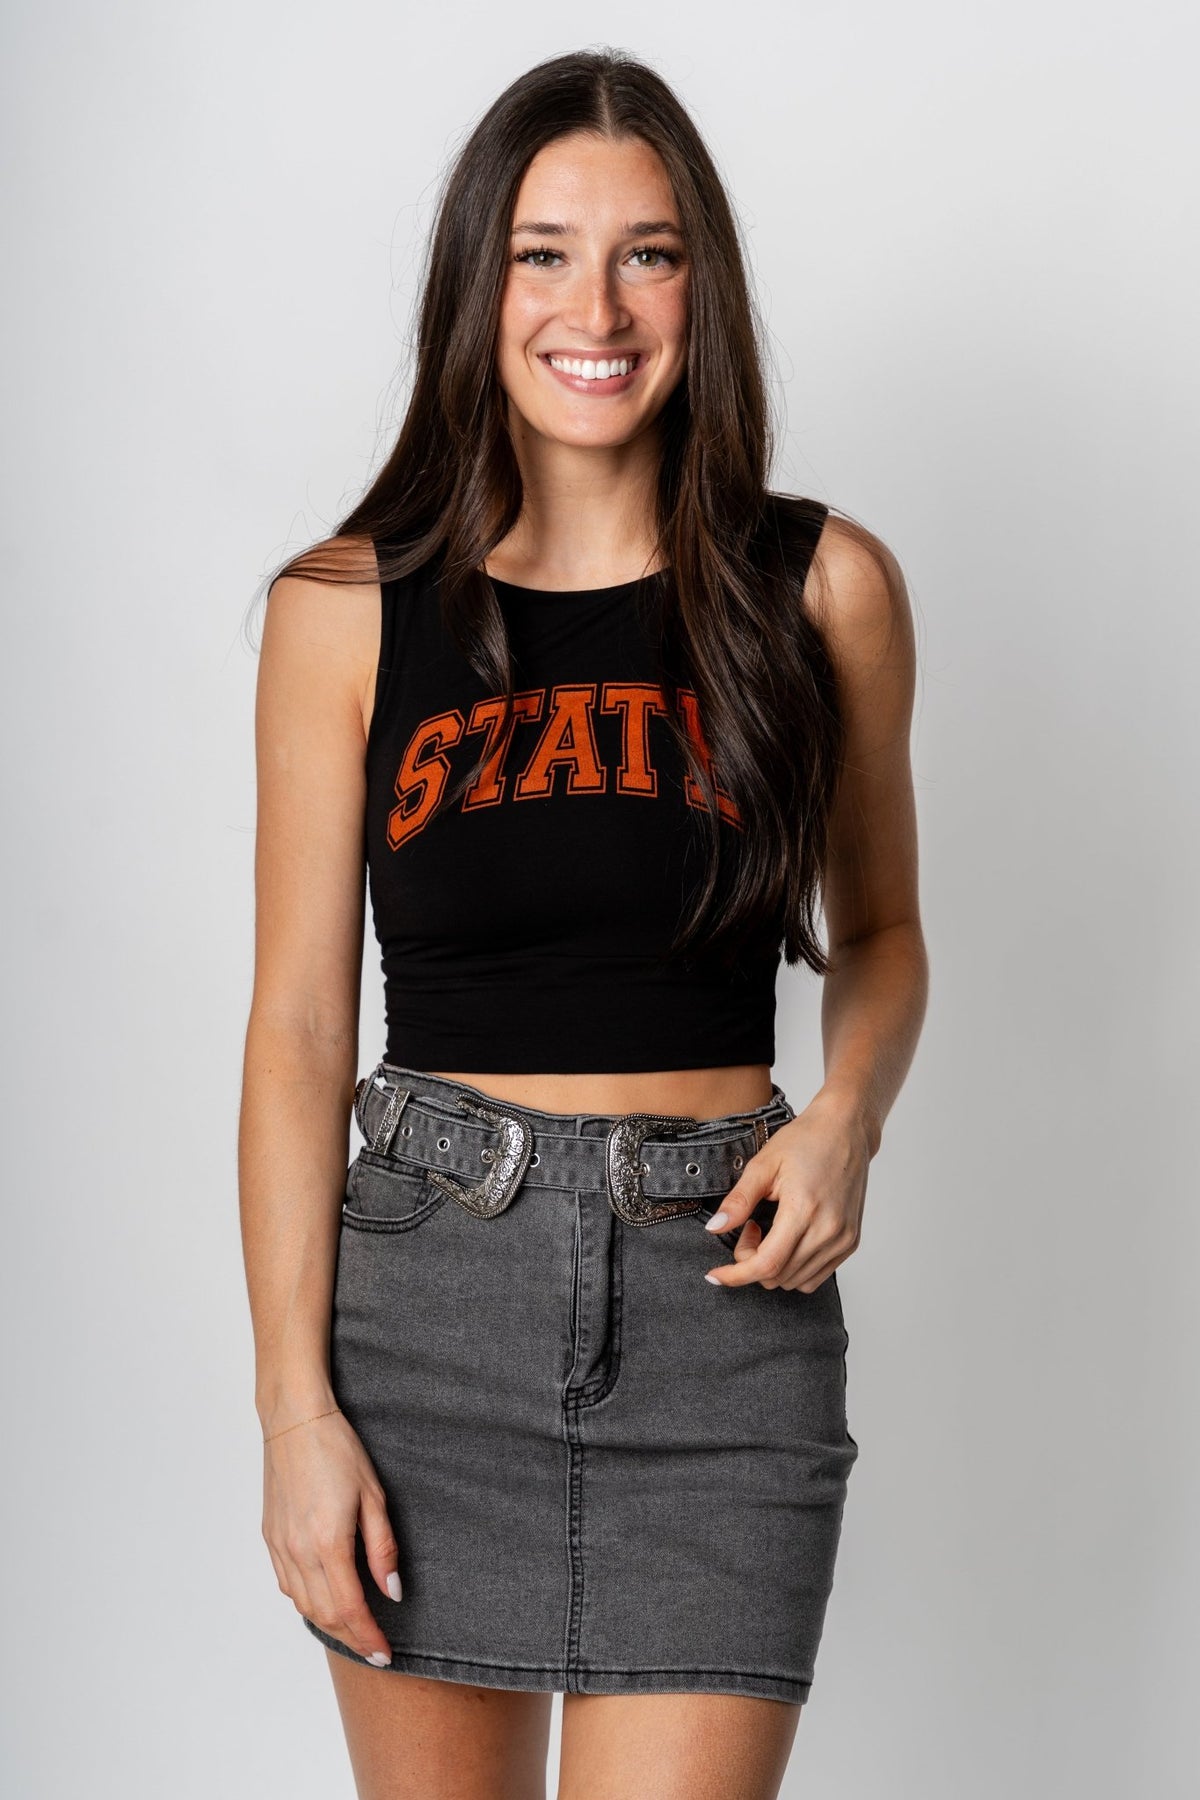 STATE varsity modal jersey crop tank top black - Cute Tank Top - Trendy Tank Tops at Lush Fashion Lounge Boutique in Oklahoma City